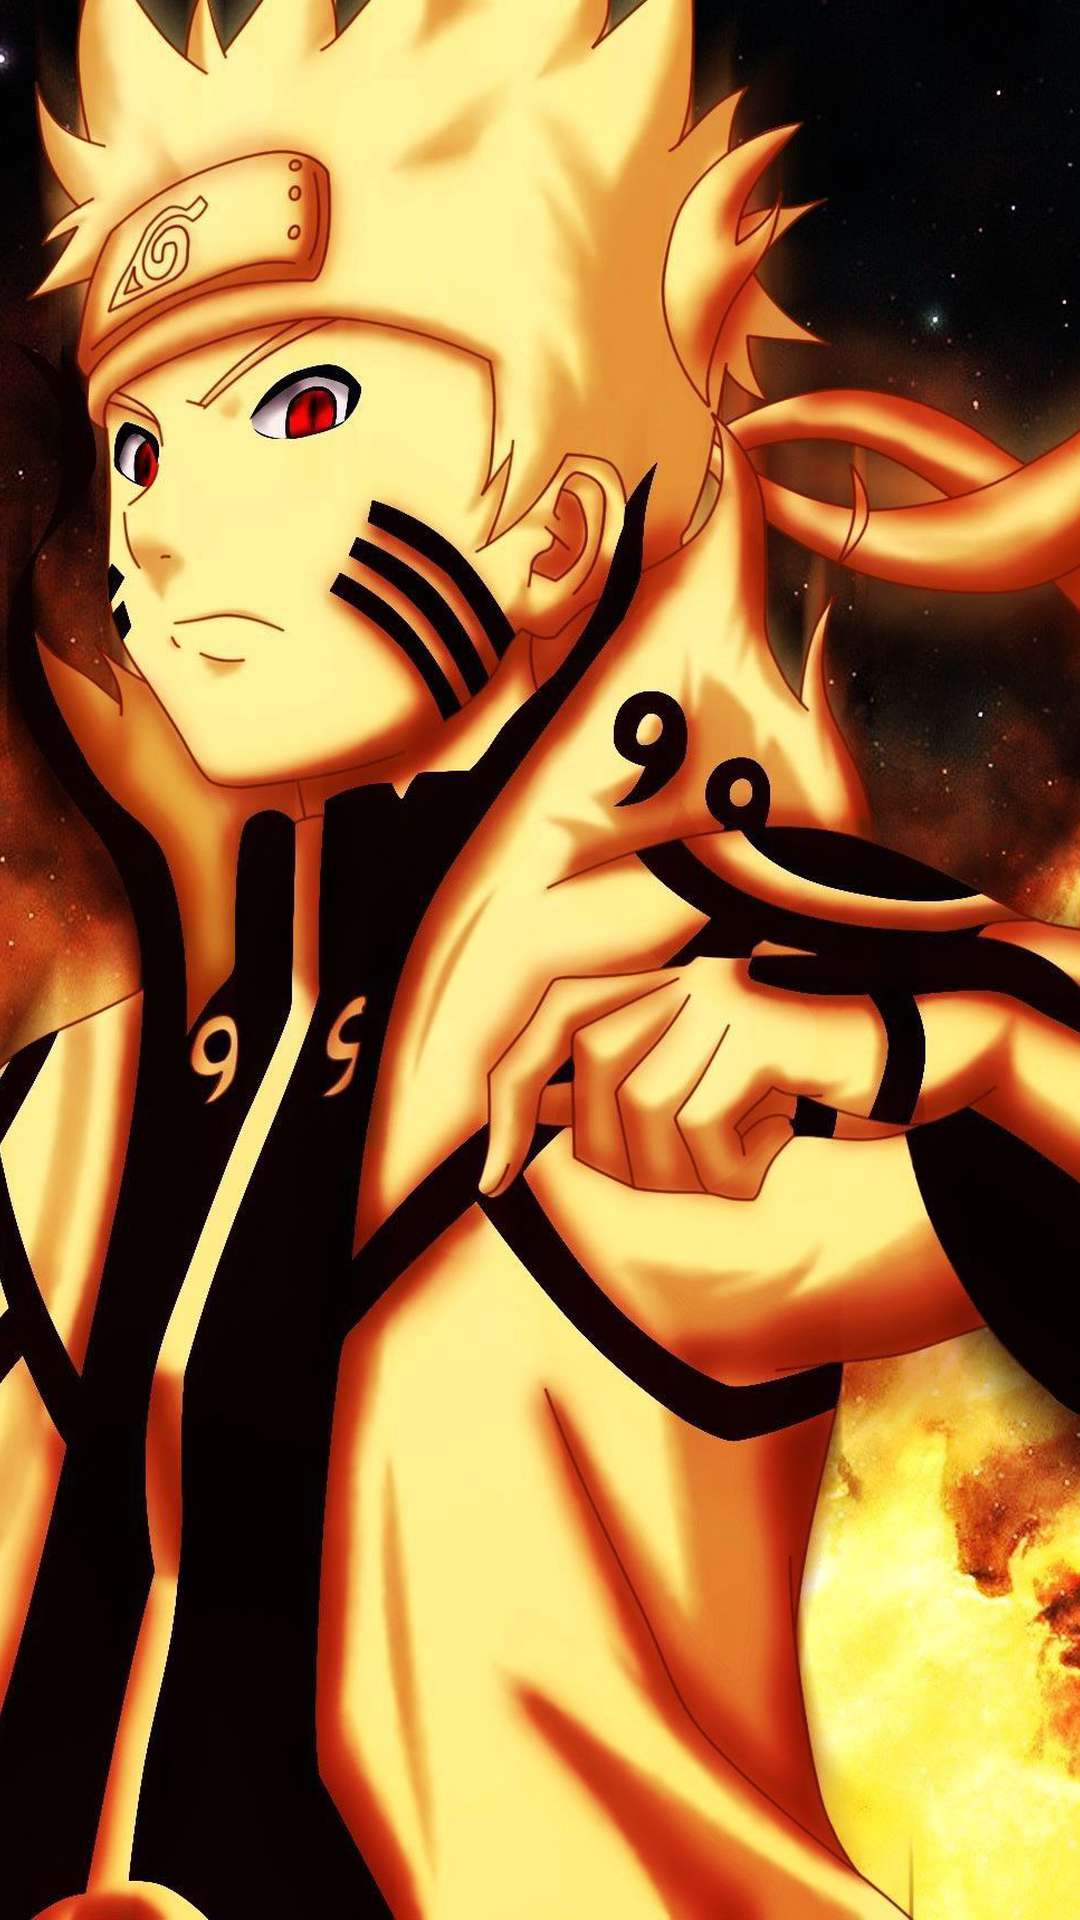 12 Anime Ninja Wallpapers for iPhone and Android by Scott Martinez